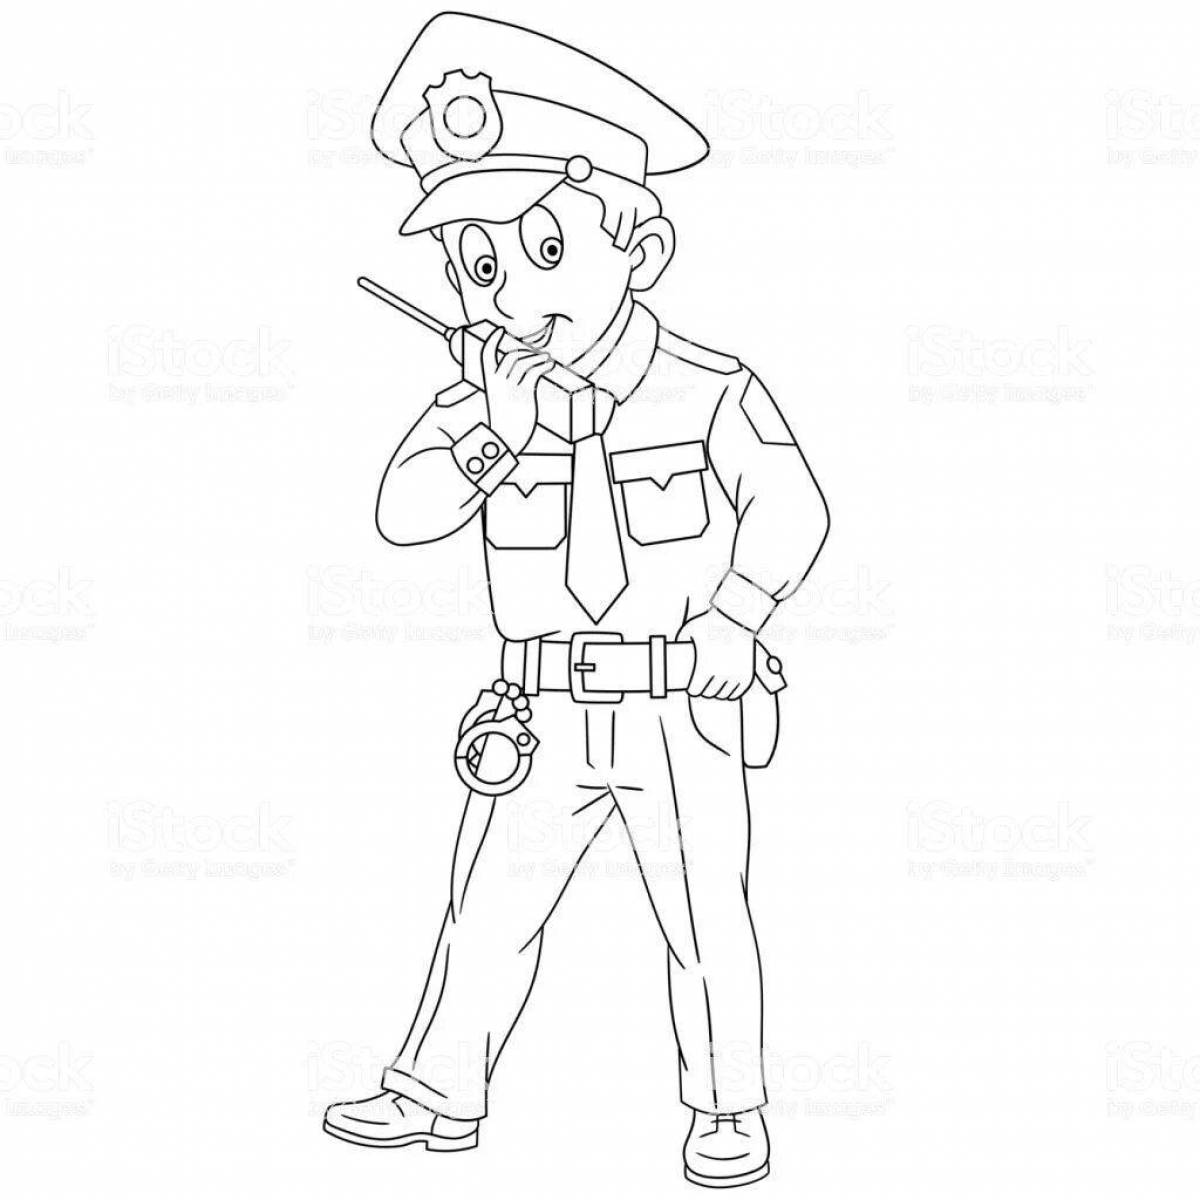 Charming traffic police inspector coloring